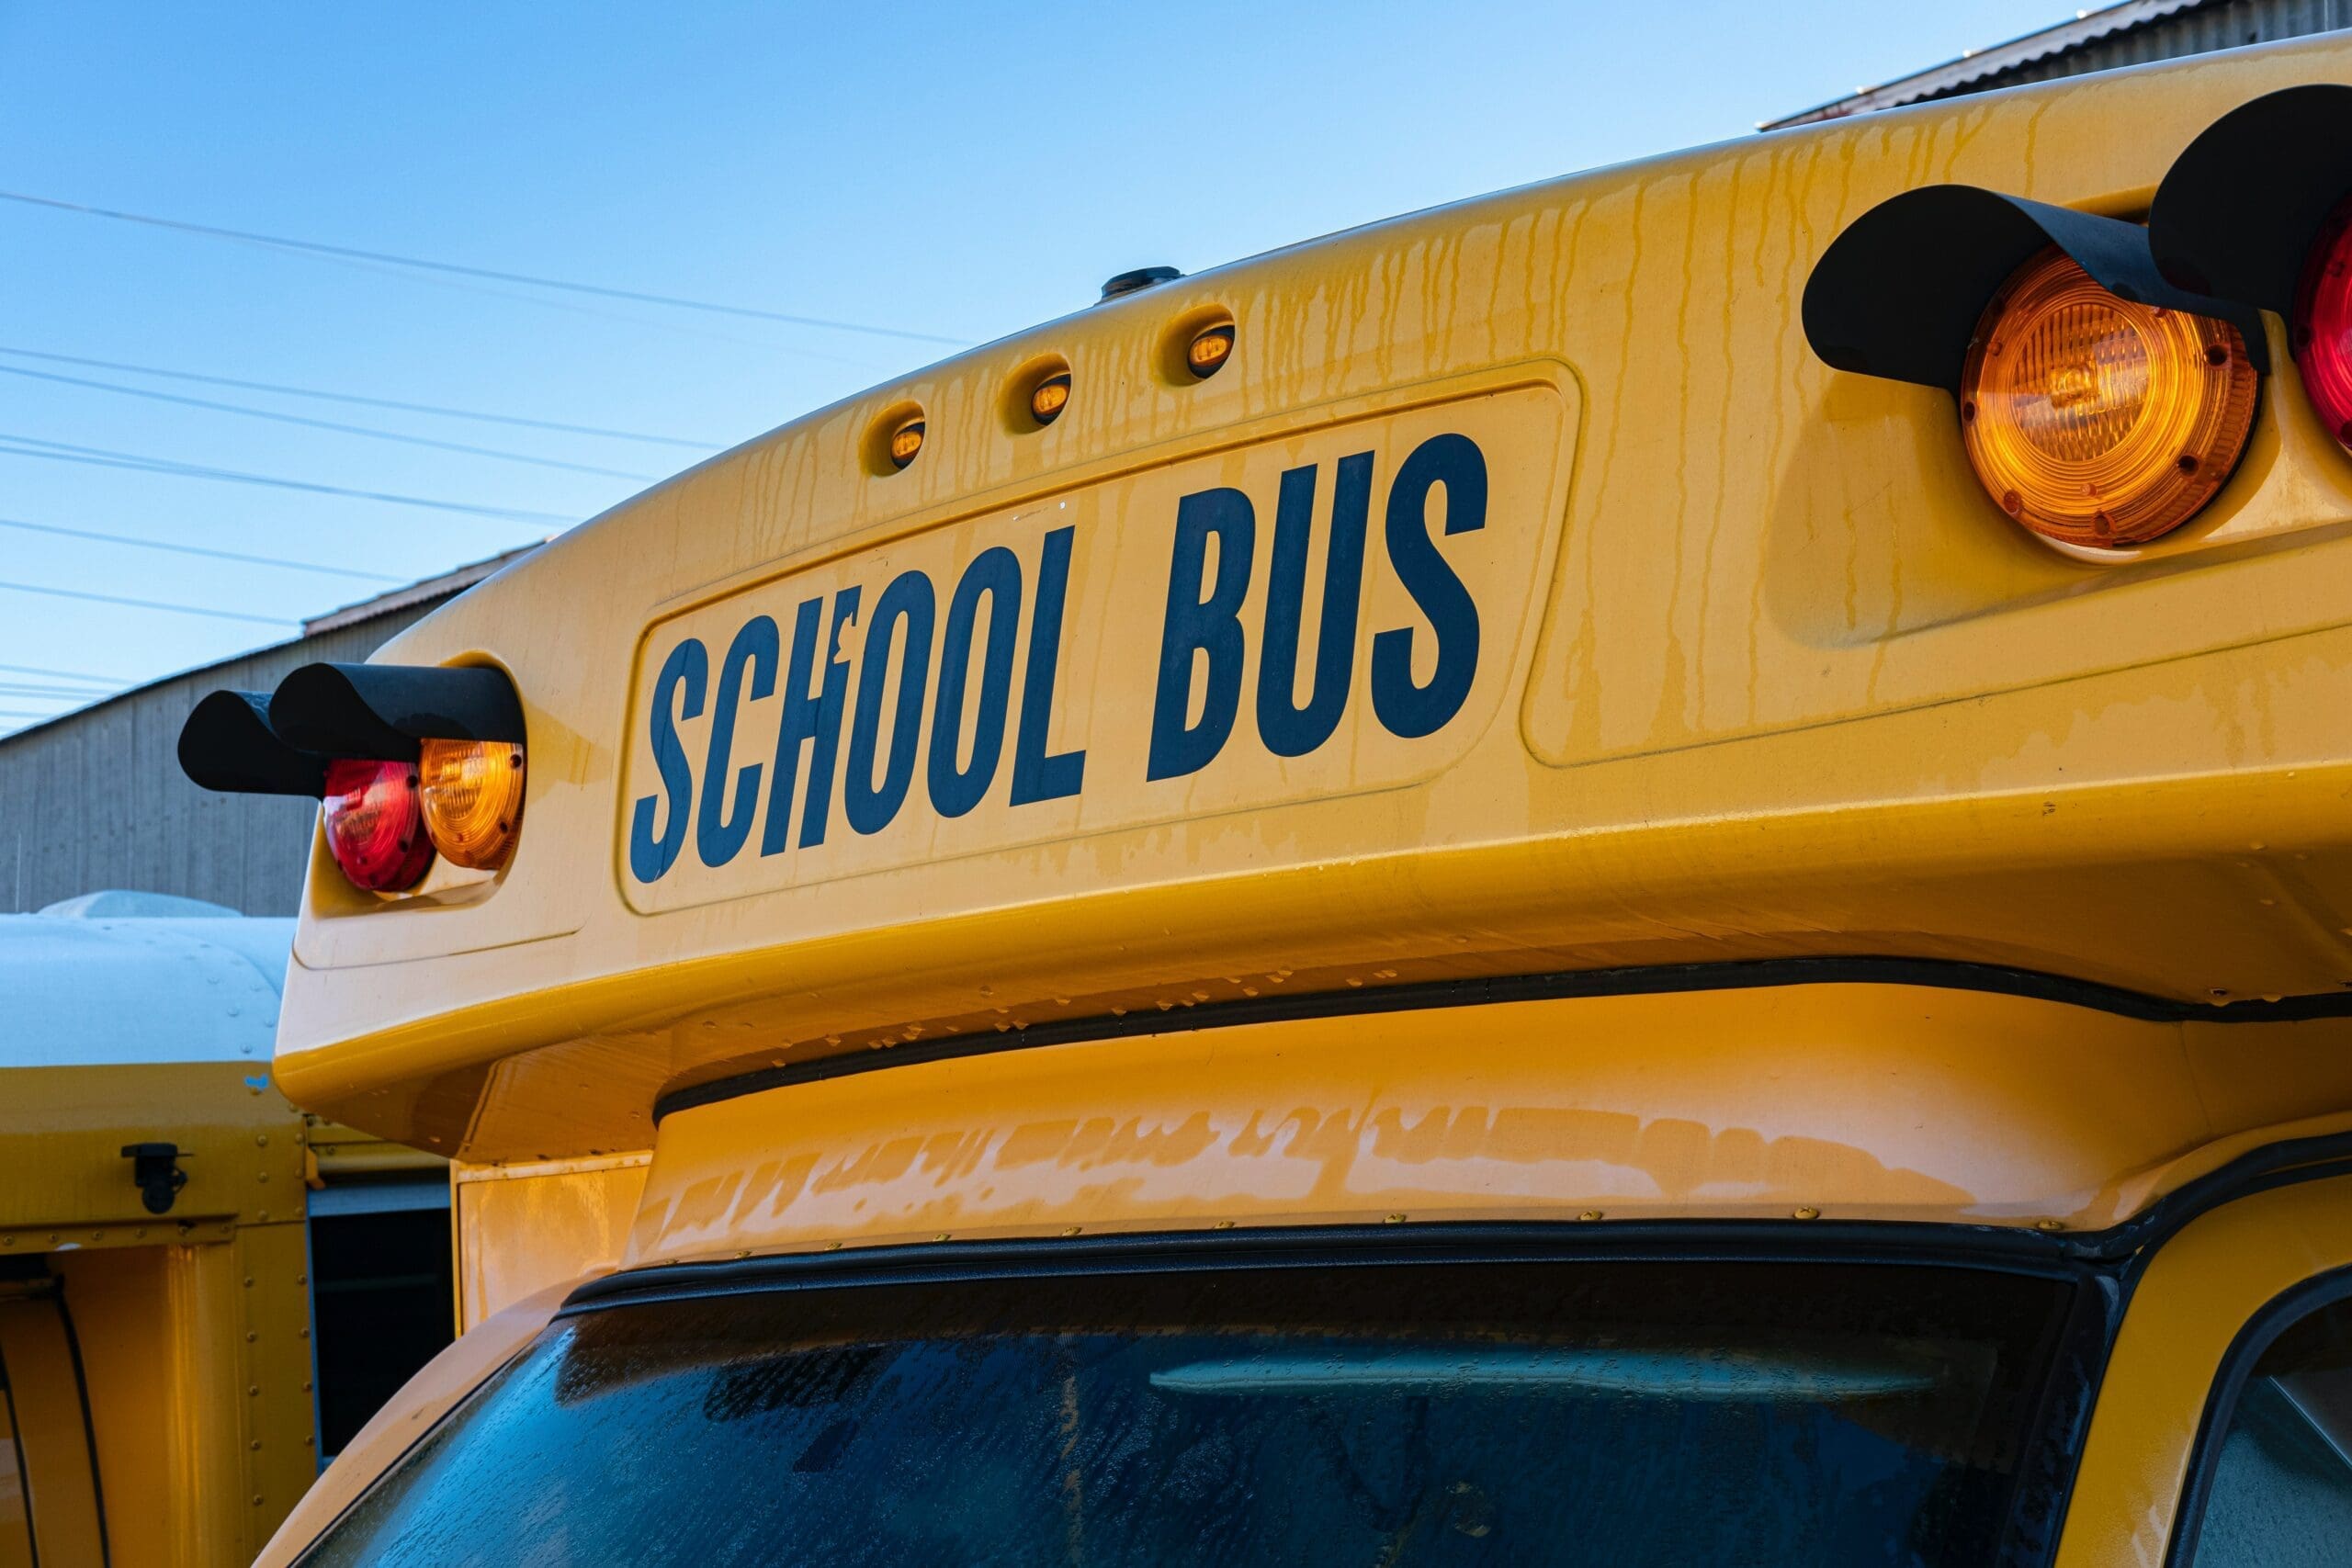 HB 81 would permit school districts to deny busing charter students.